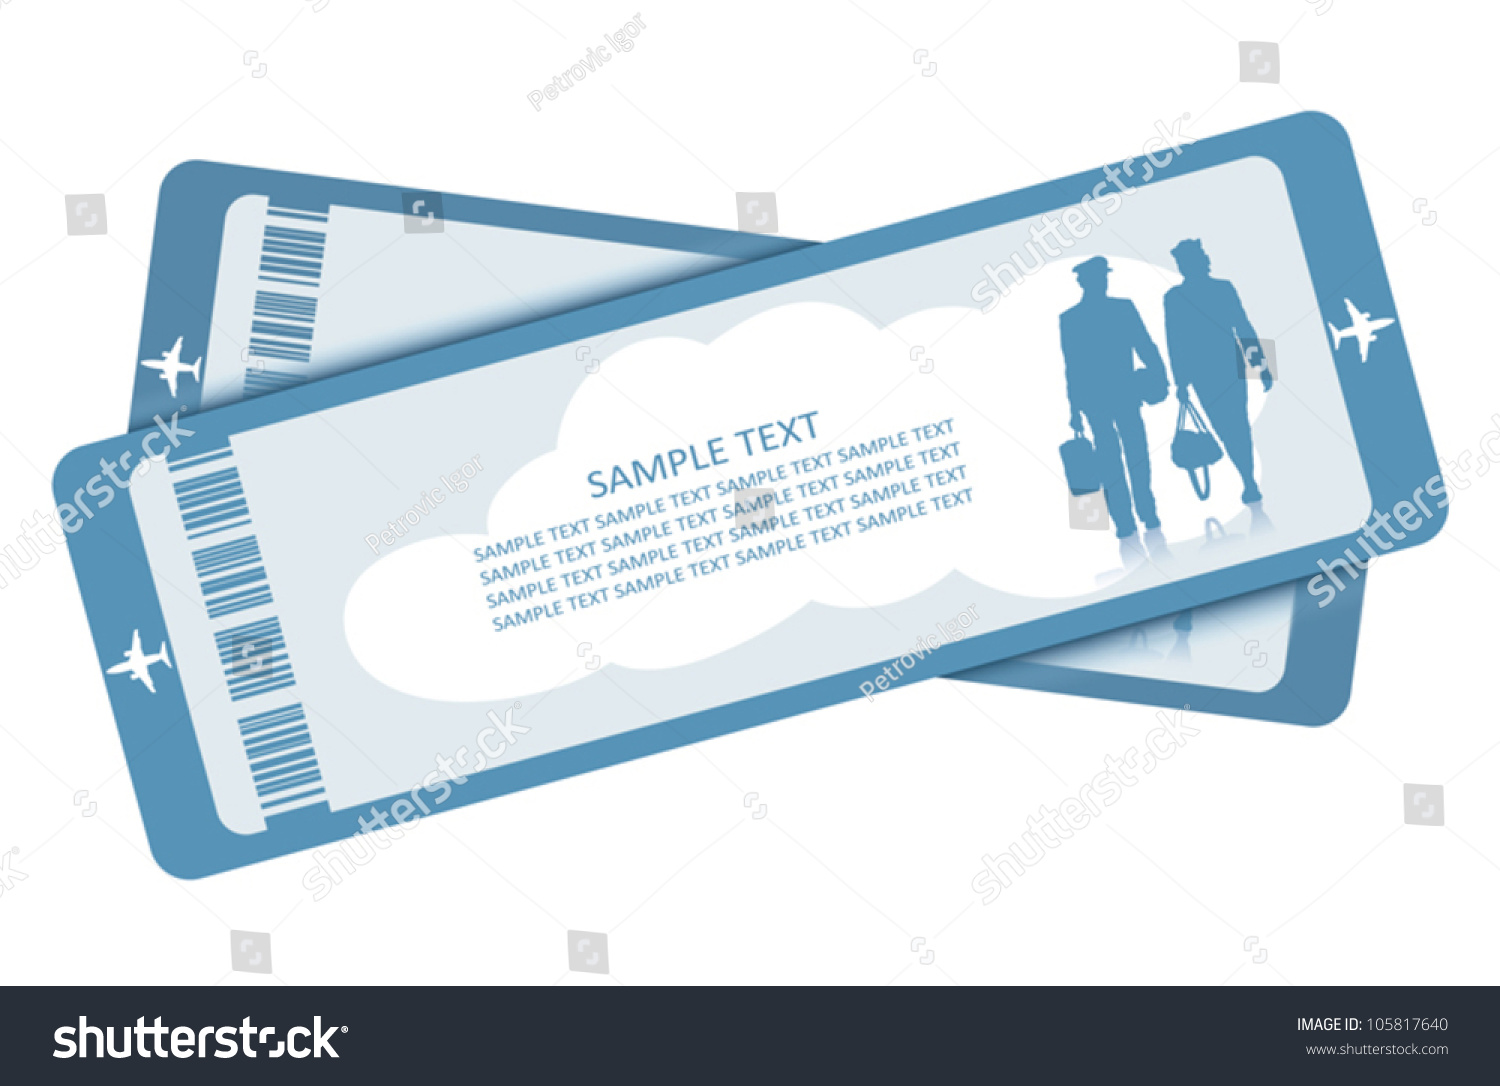 free clipart airplane ticket - photo #38